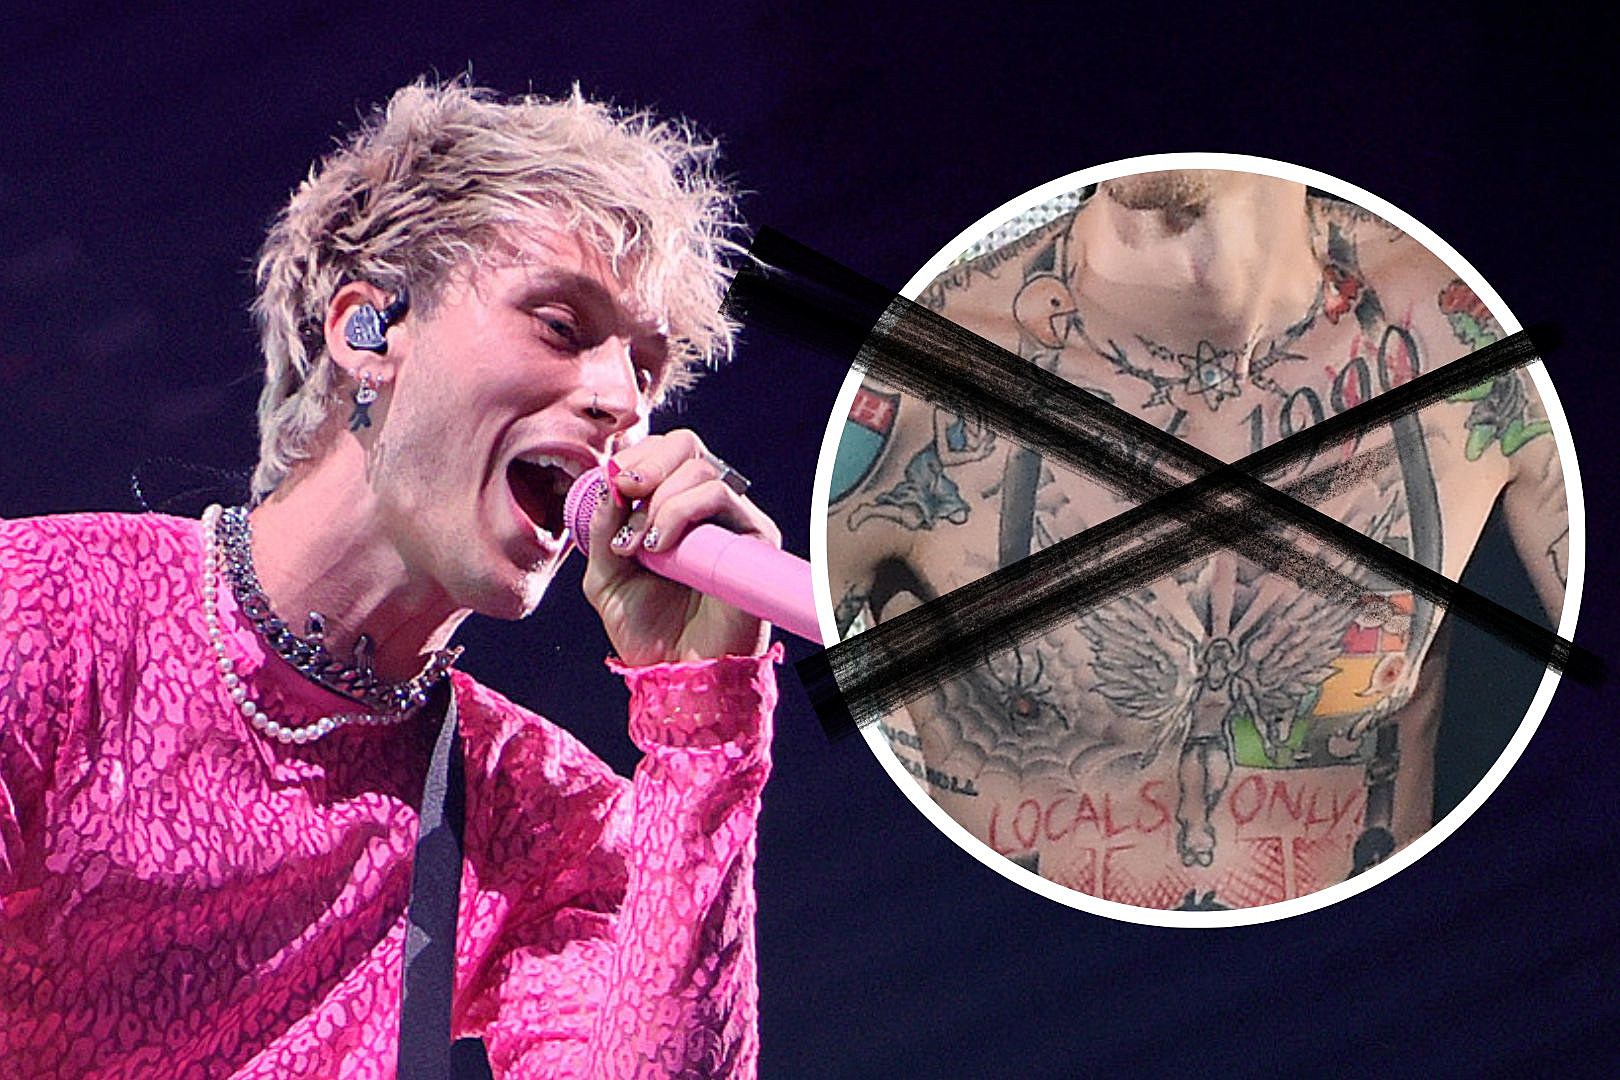 Damn. Looks like Kells covered more of his chest tattoos : r/MachineGunKelly